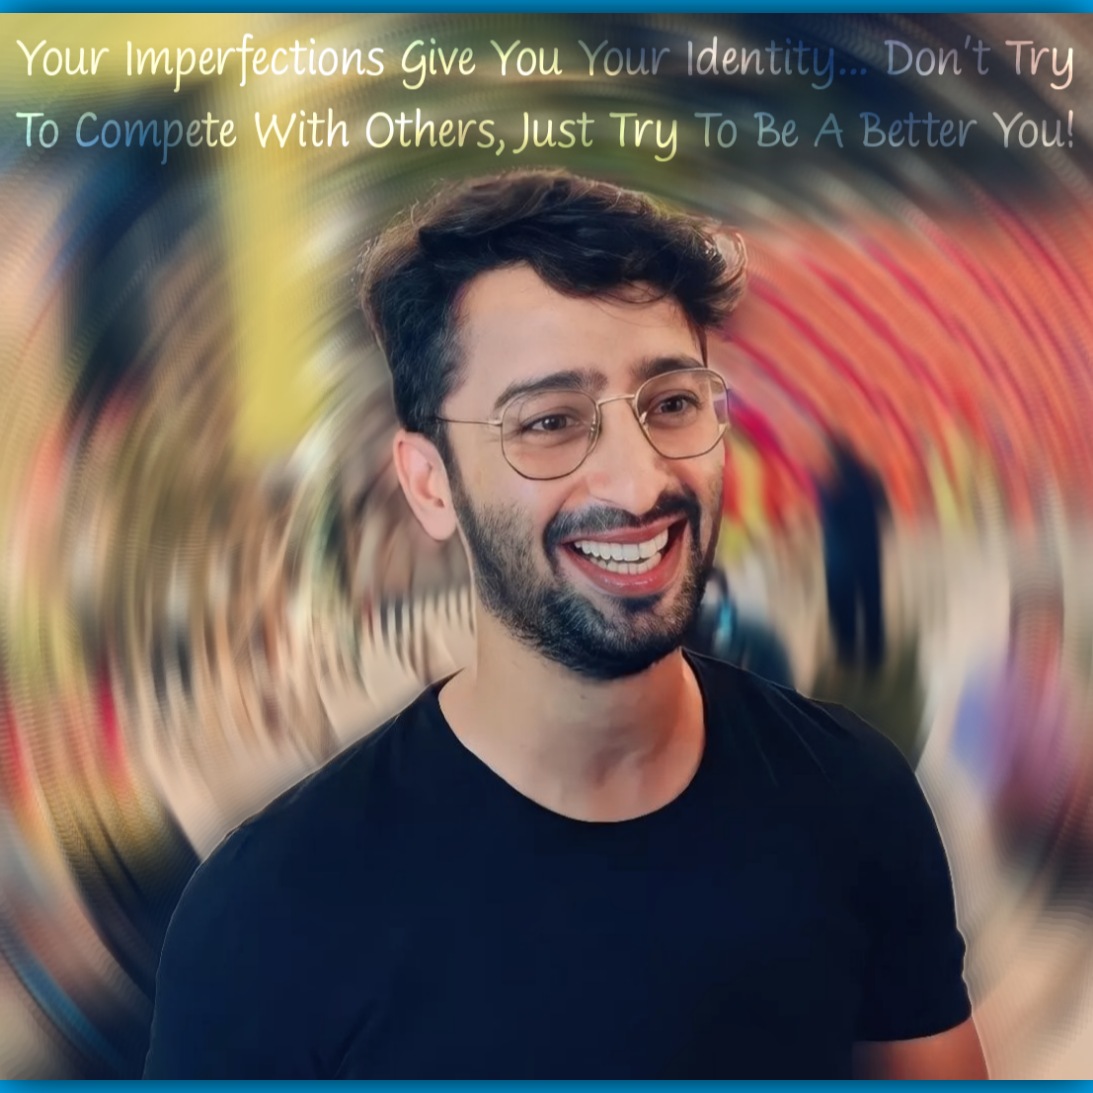 Your Imperfections Give You Your Identity... Don’t Try To Compete With Others, Just Try To Be A Better You! ~ Shaheer 💫 

#ShaheerSheikh #SSQuotes #ShaheerSayings #RiseNShine #StayHealthy #StayBlessed #LoveAndRespect

@Shaheer_S ♥️

#GodBlessYou #ShaheerSheikh